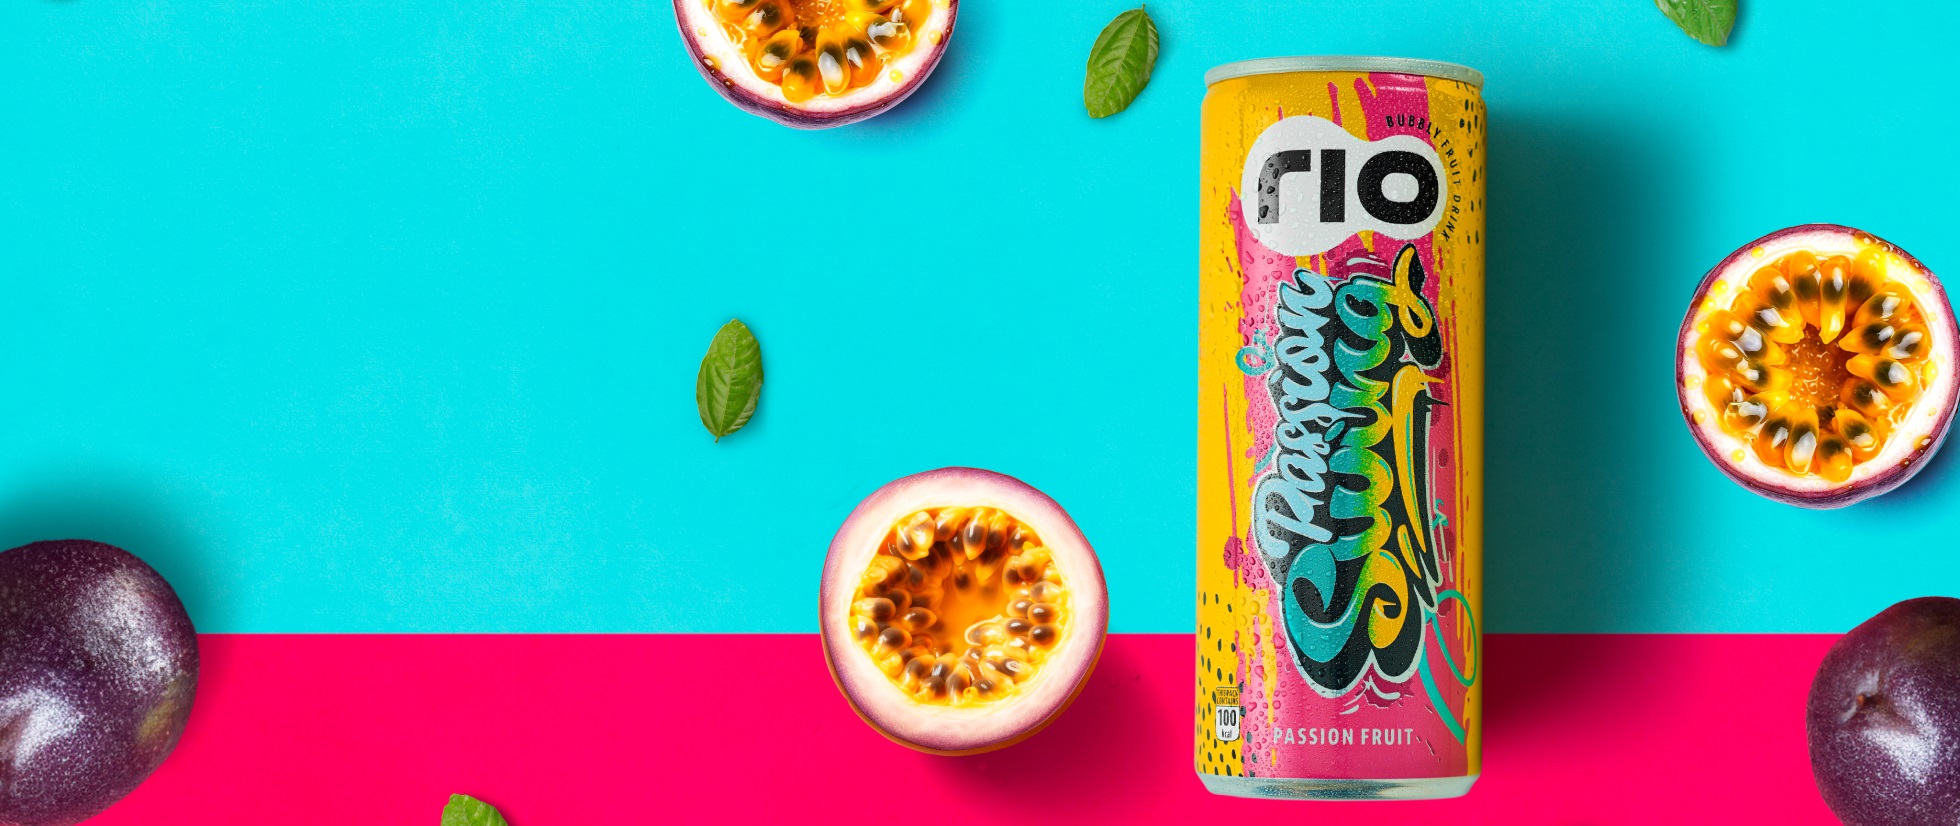 Rio Passion Fruit Bubbly Fruit Drink